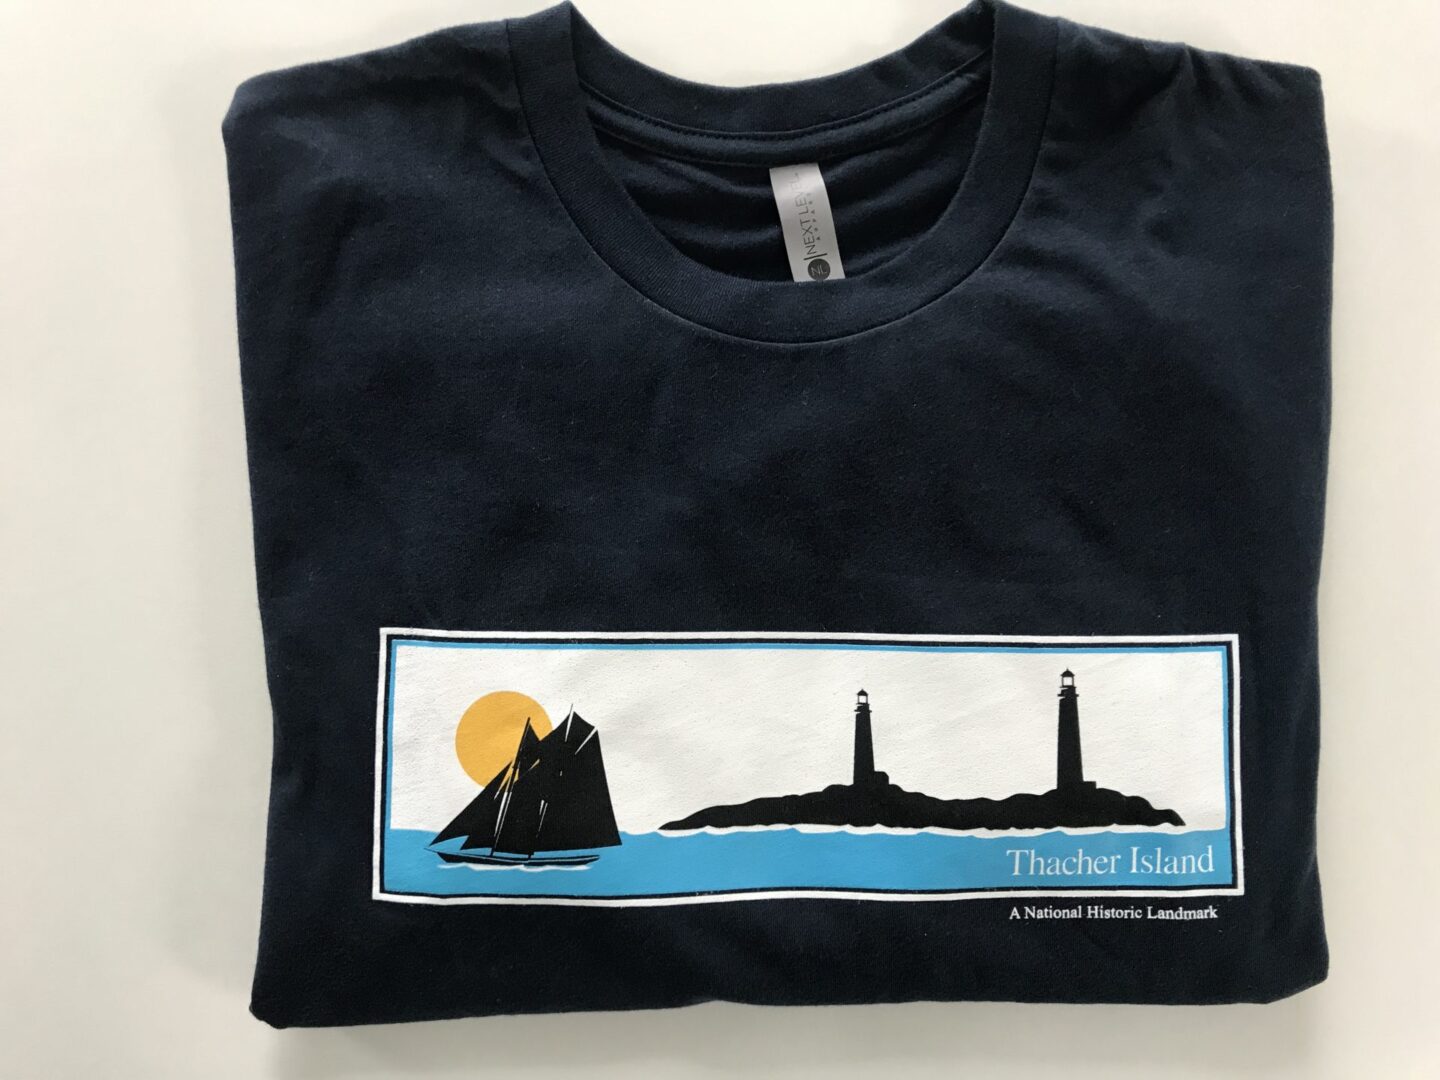 A black t-shirt with a picture of a boat and lighthouse.